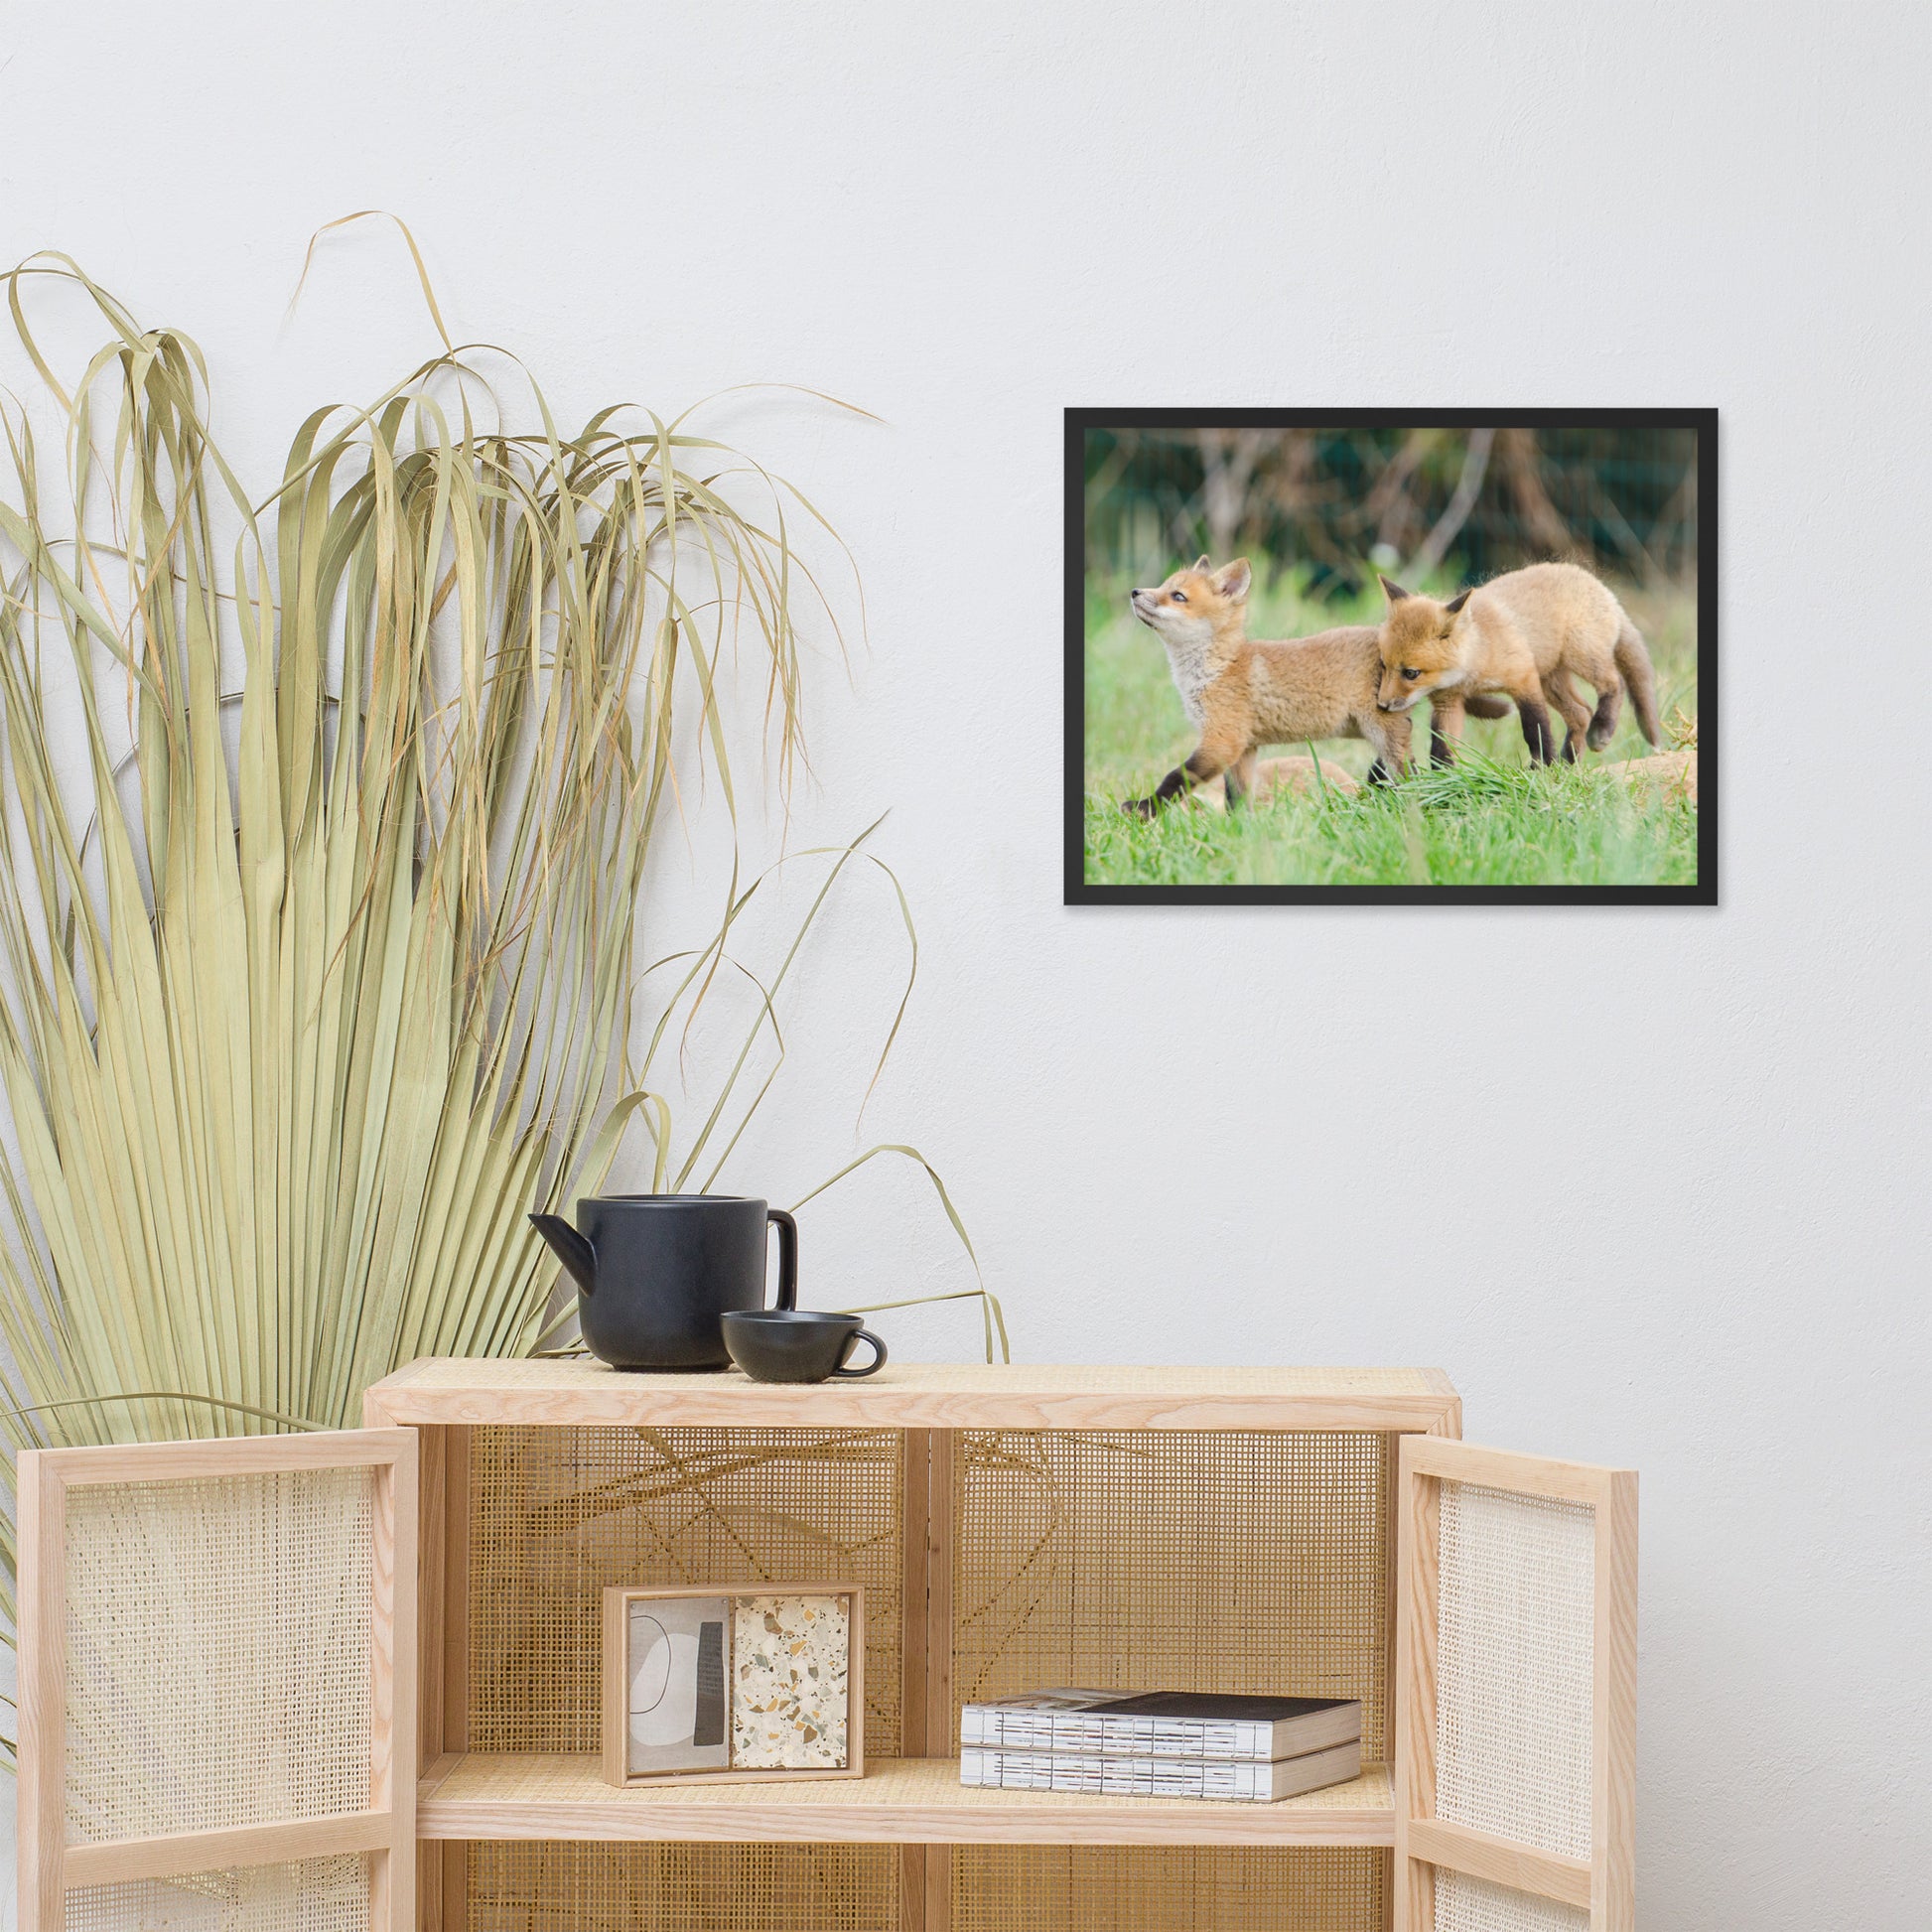 Play Room Prints: Playful Baby Red Fox Pups In Field - Animal / Wildlife / Nature Artwork - Wall Decor - Framed Wall Art Print